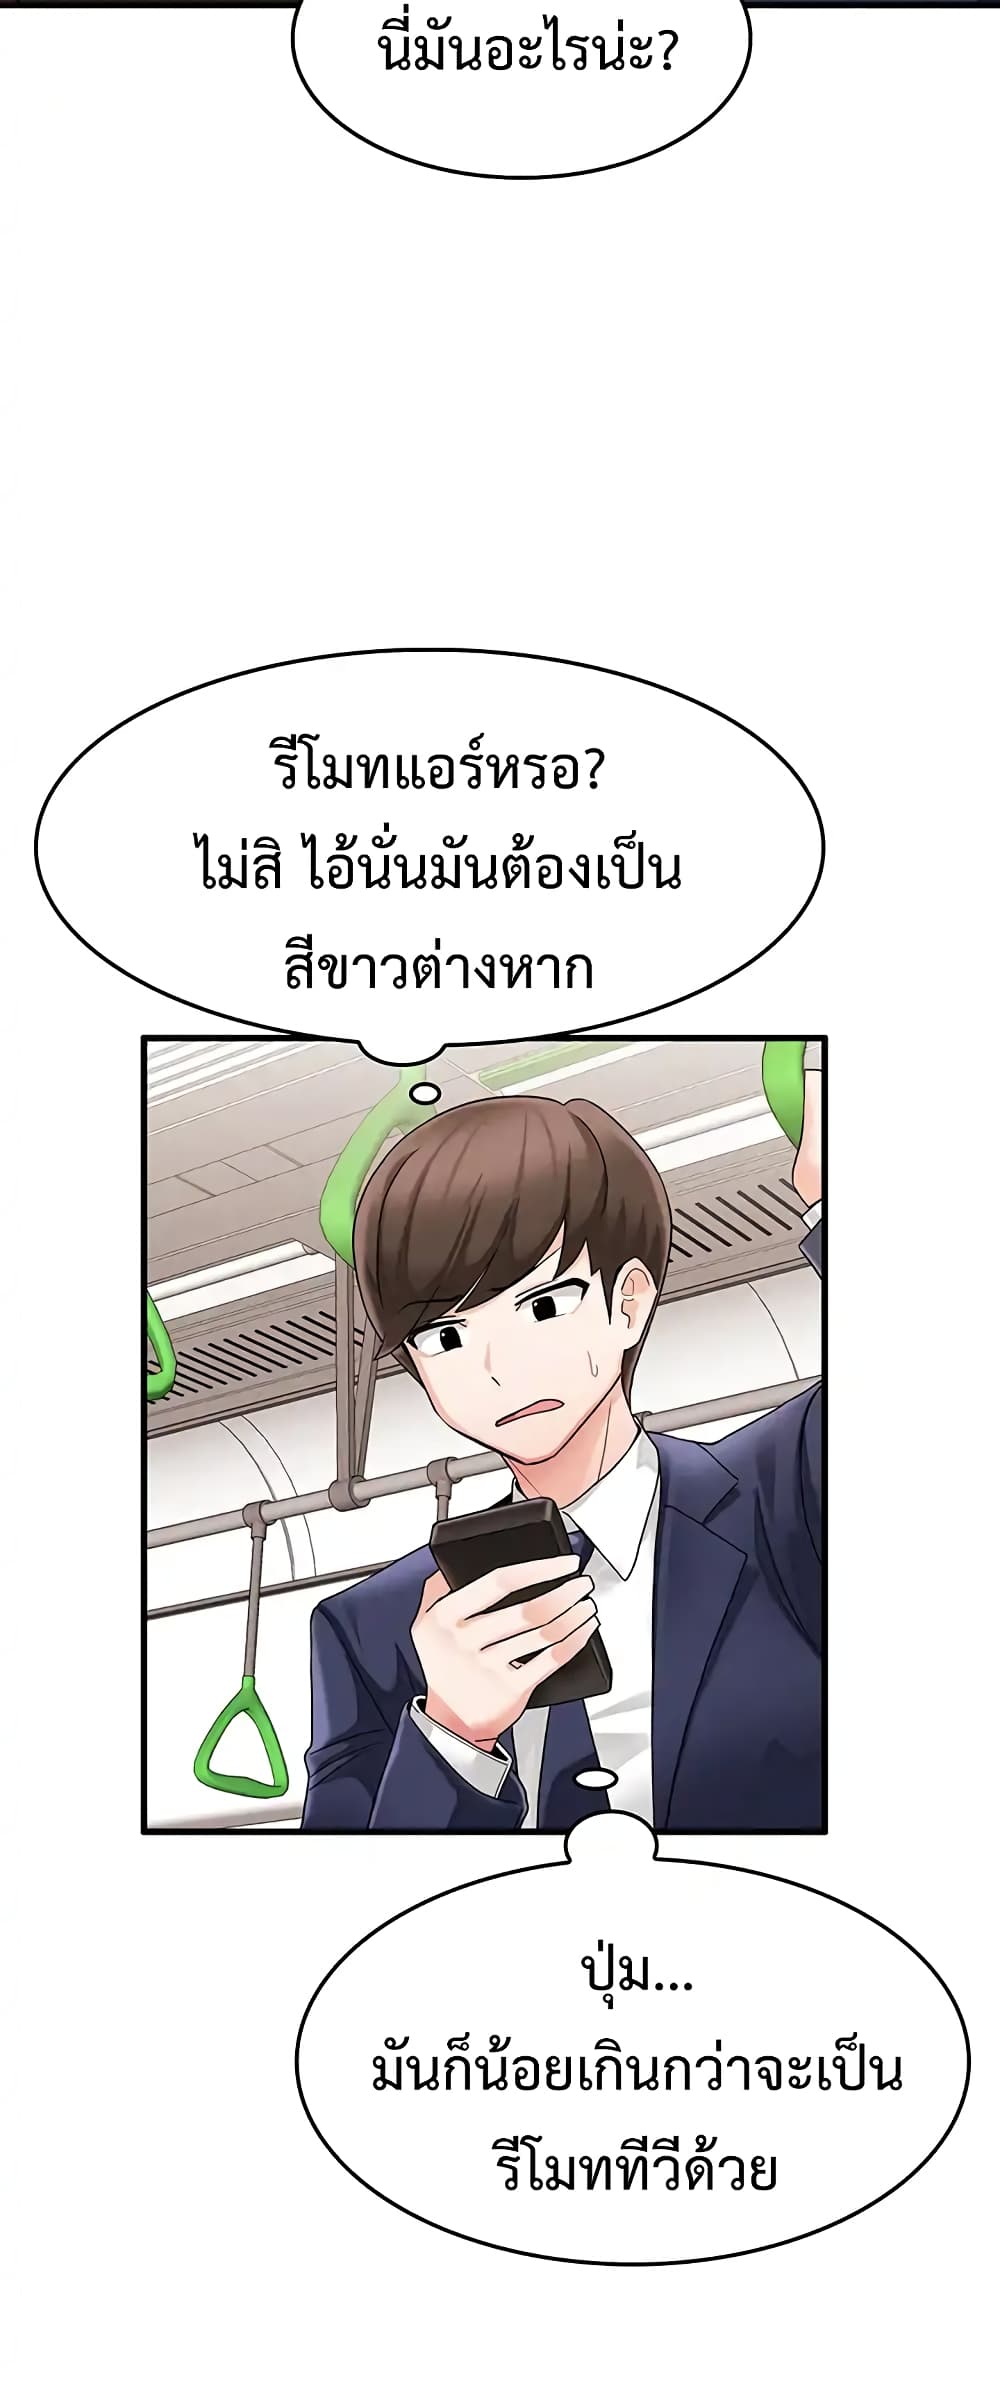 Relationship Reverse Button: Let’s Make Her Submissive 1 ภาพที่ 8